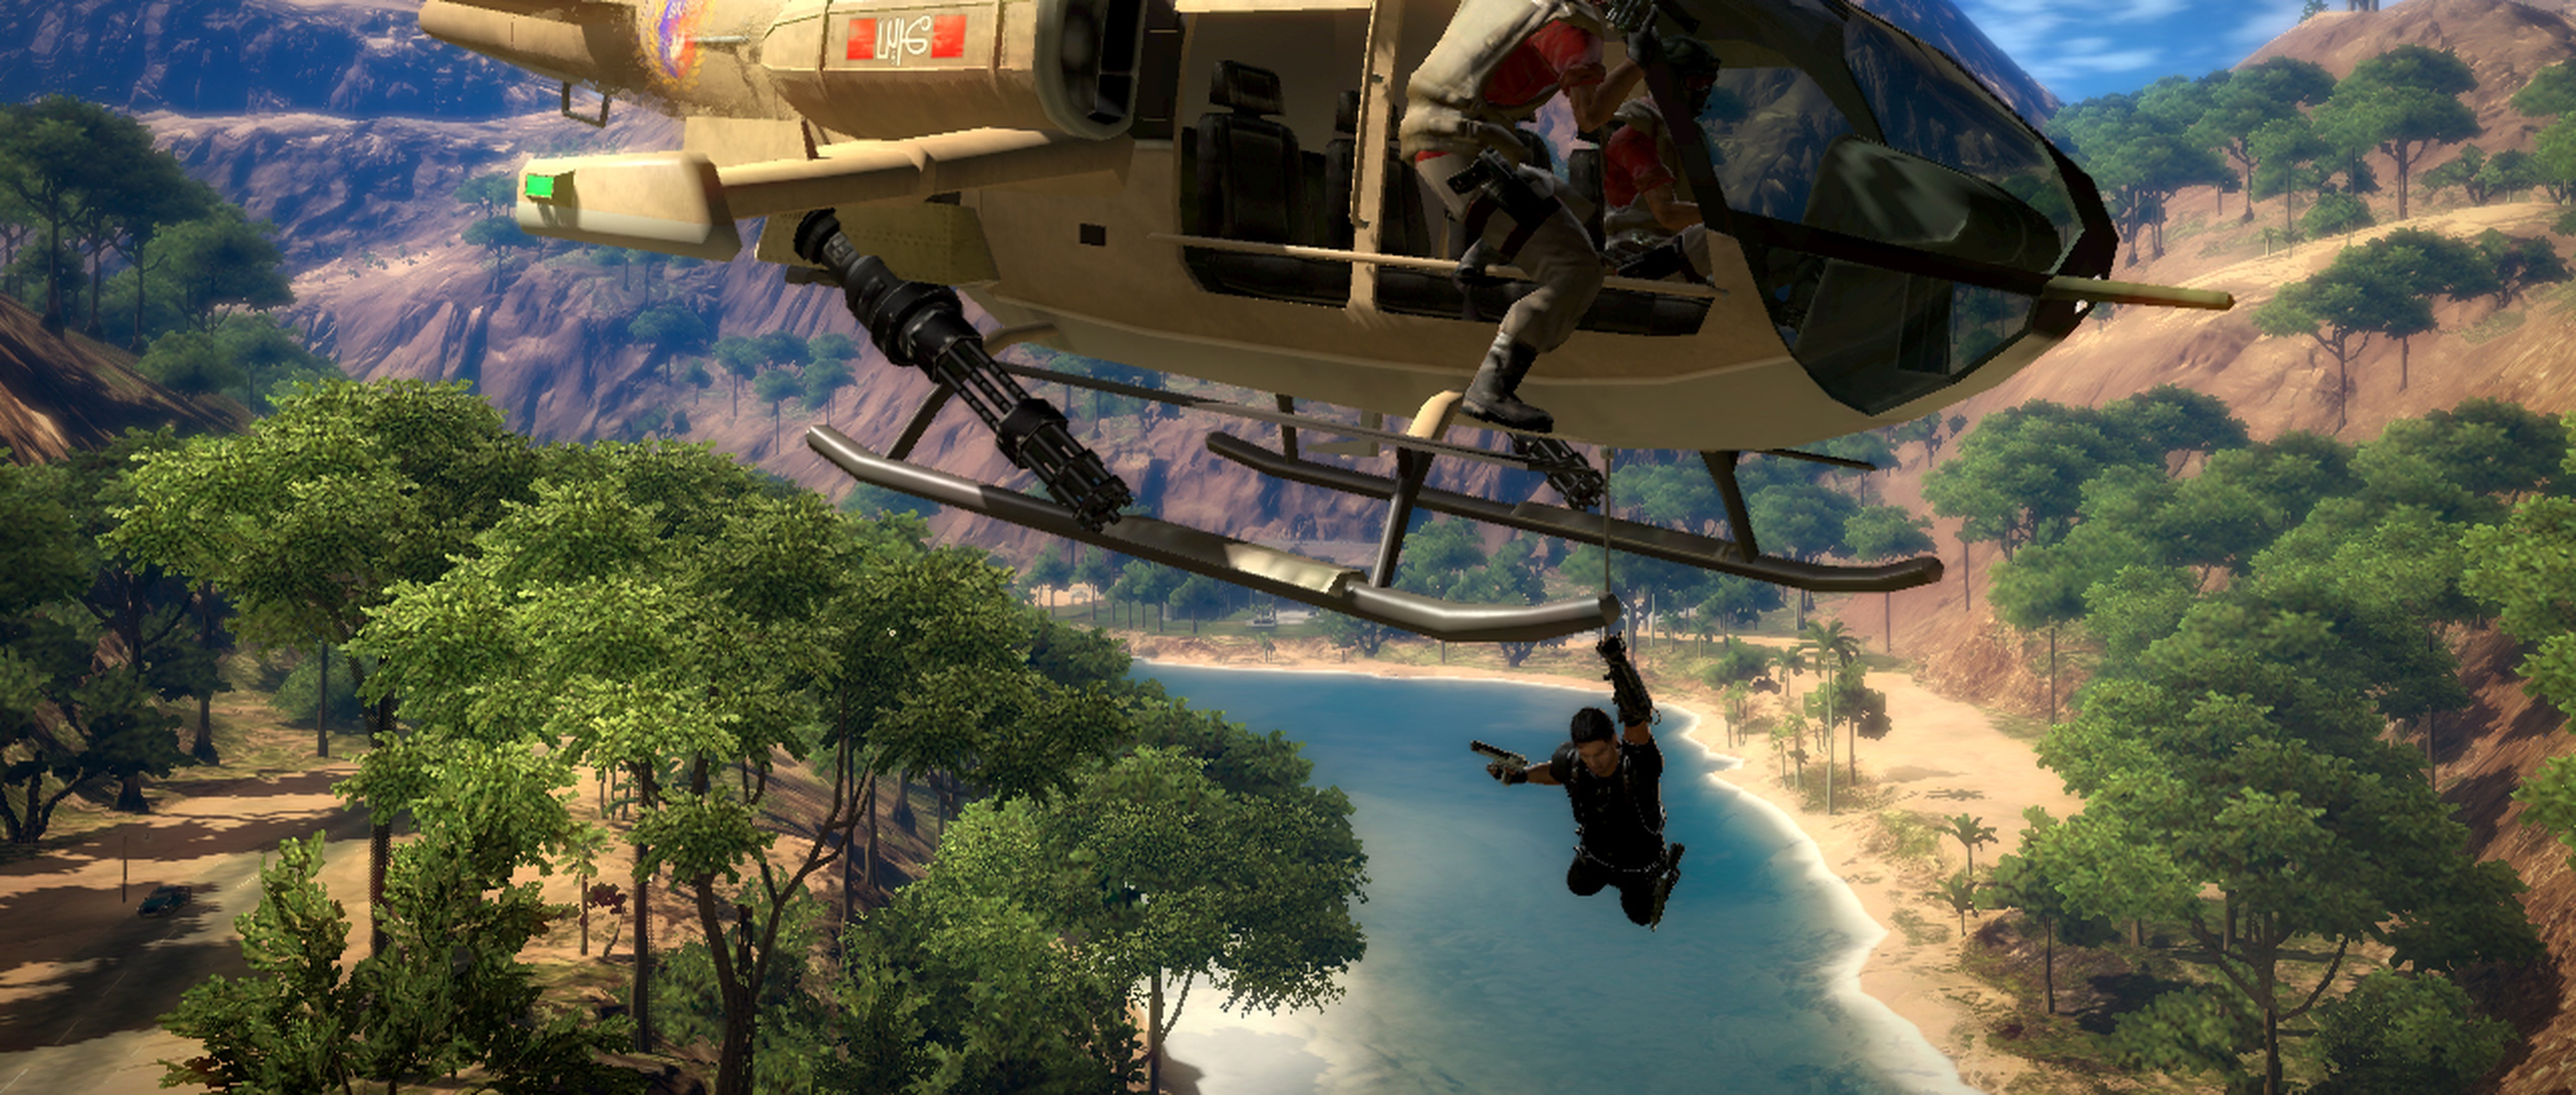 just cause 2 release dates